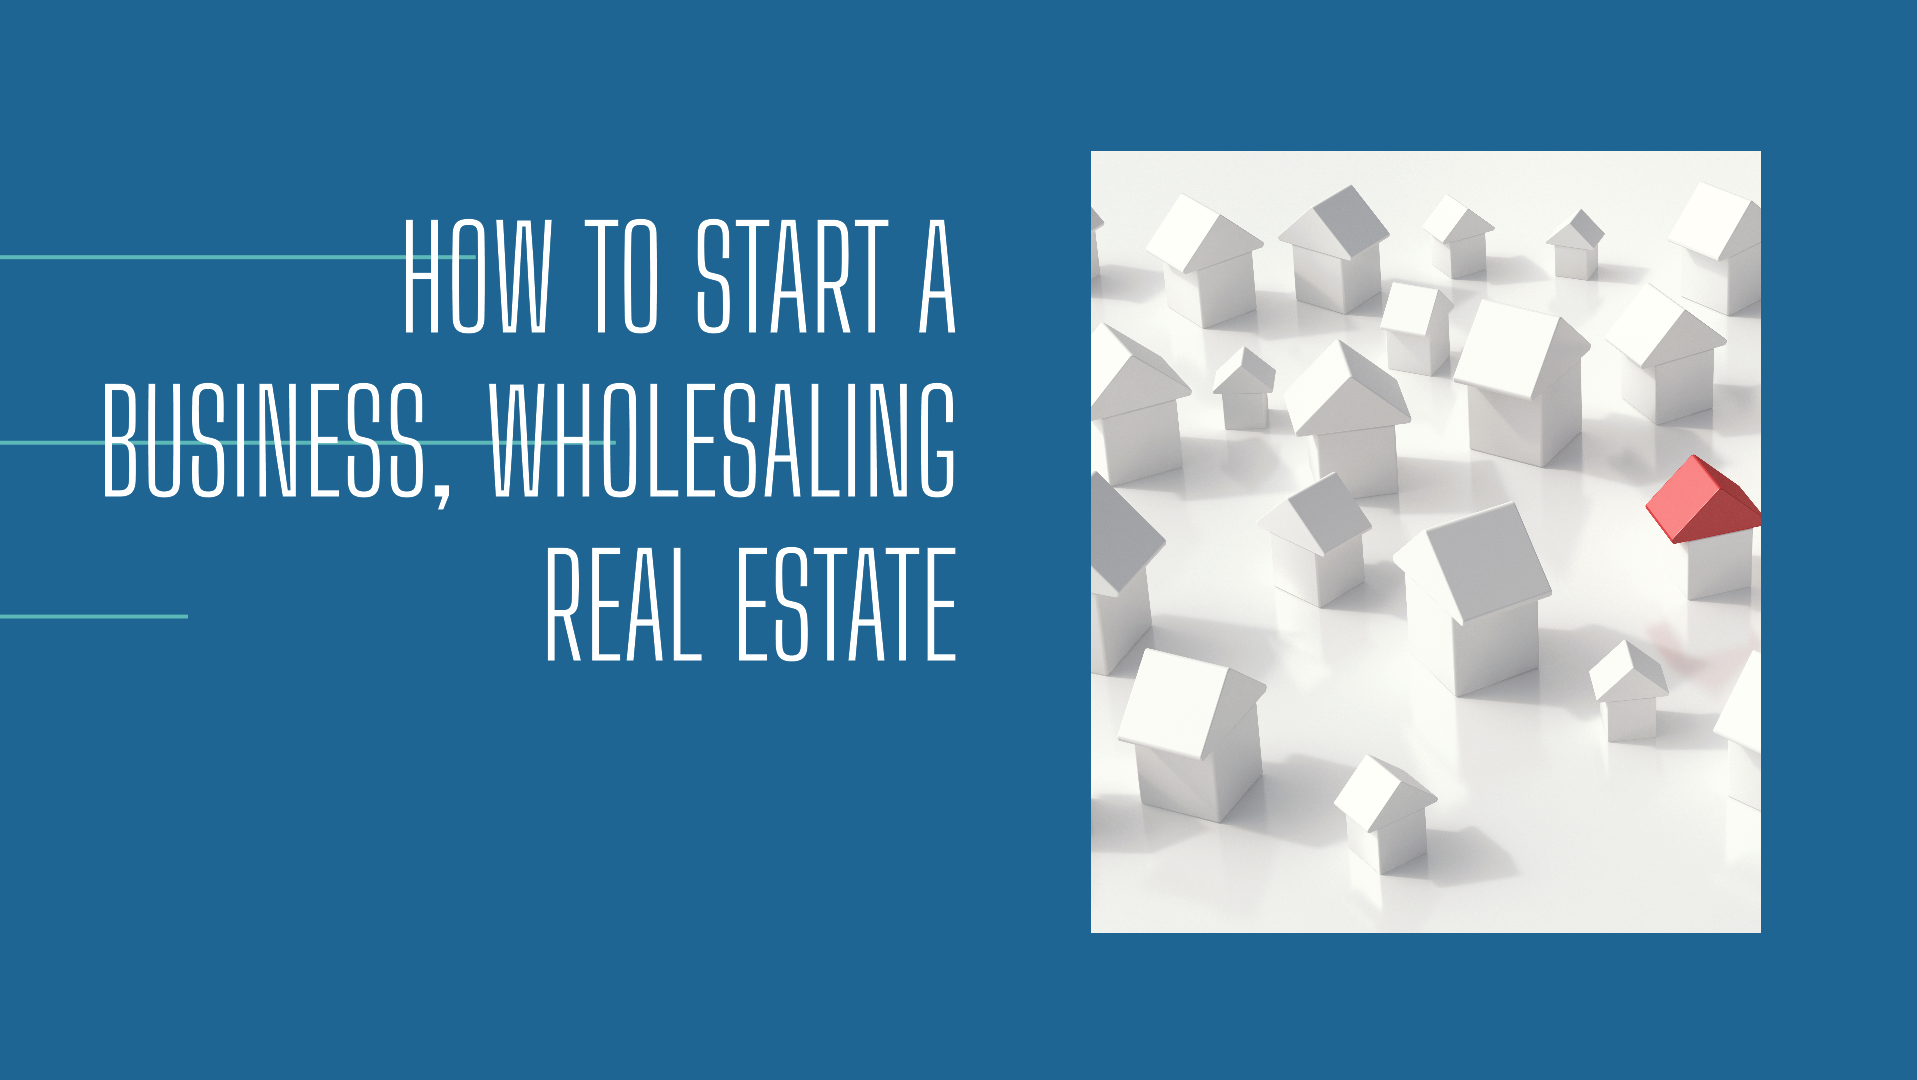 How To Start a Business, Wholesaling Real Estate